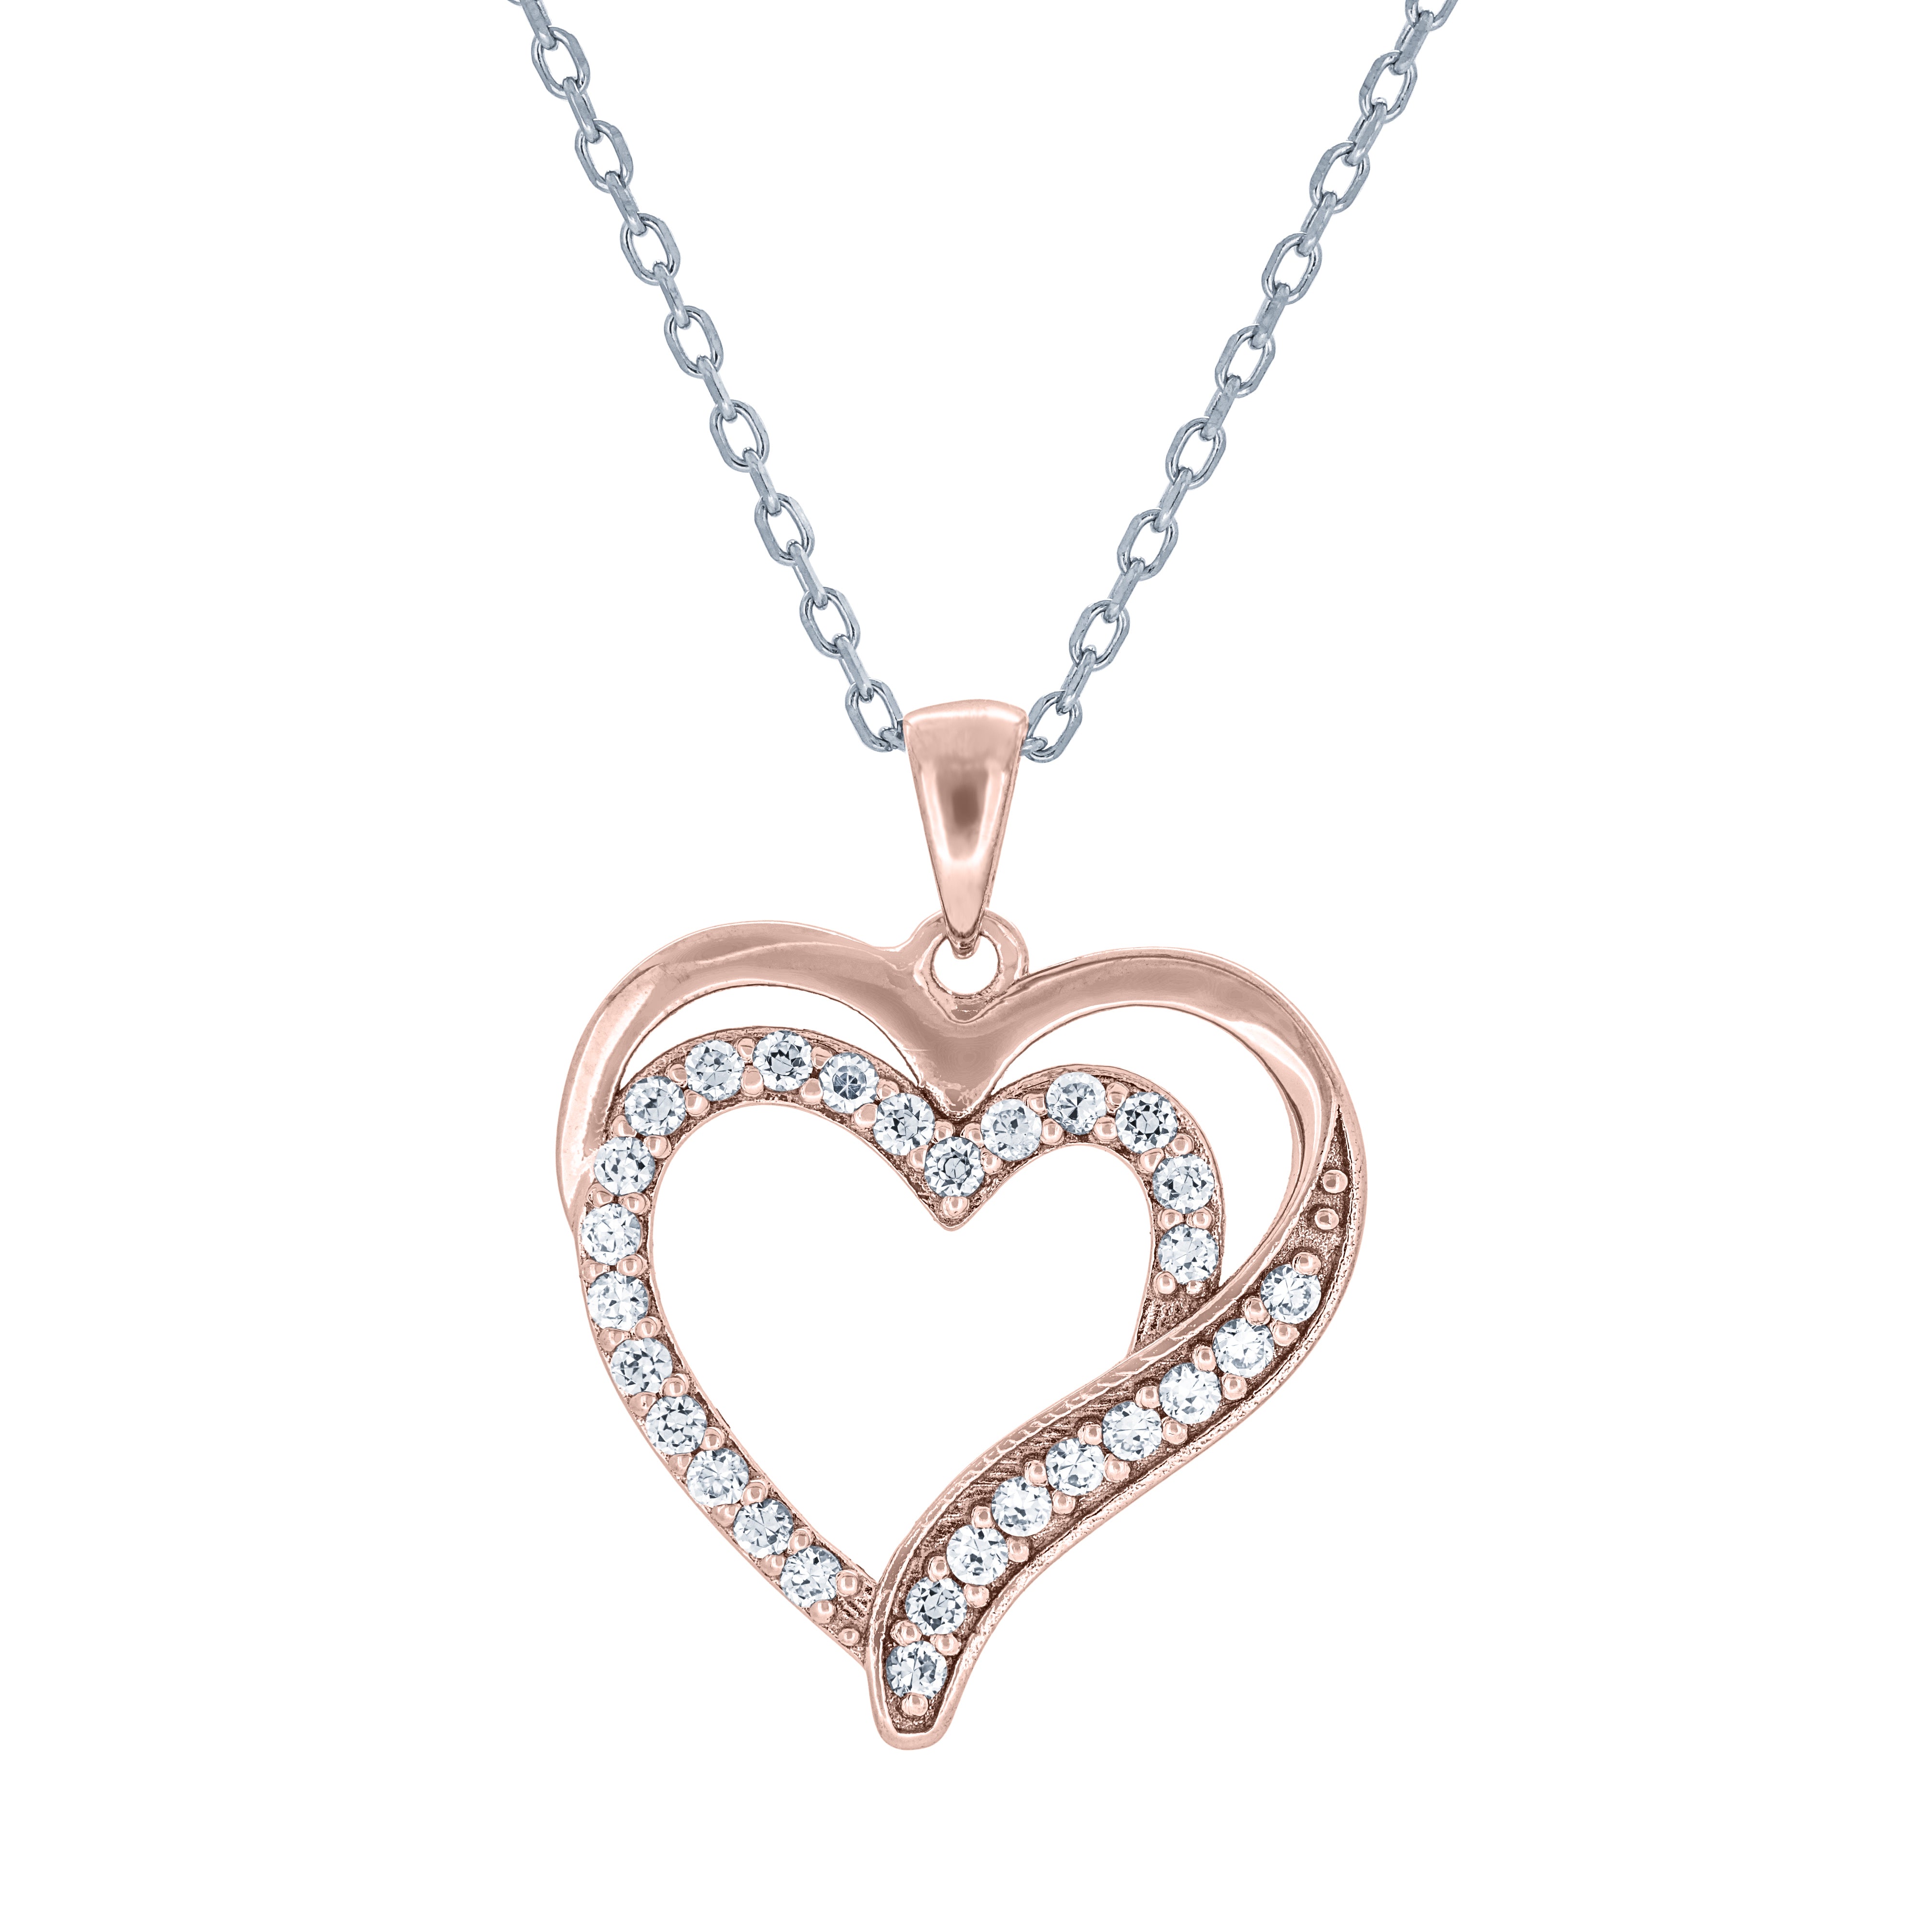 (100017A) White Cubic Zirconia Heart Pendant Necklace In Sterling Silver and Rose Gold Plate